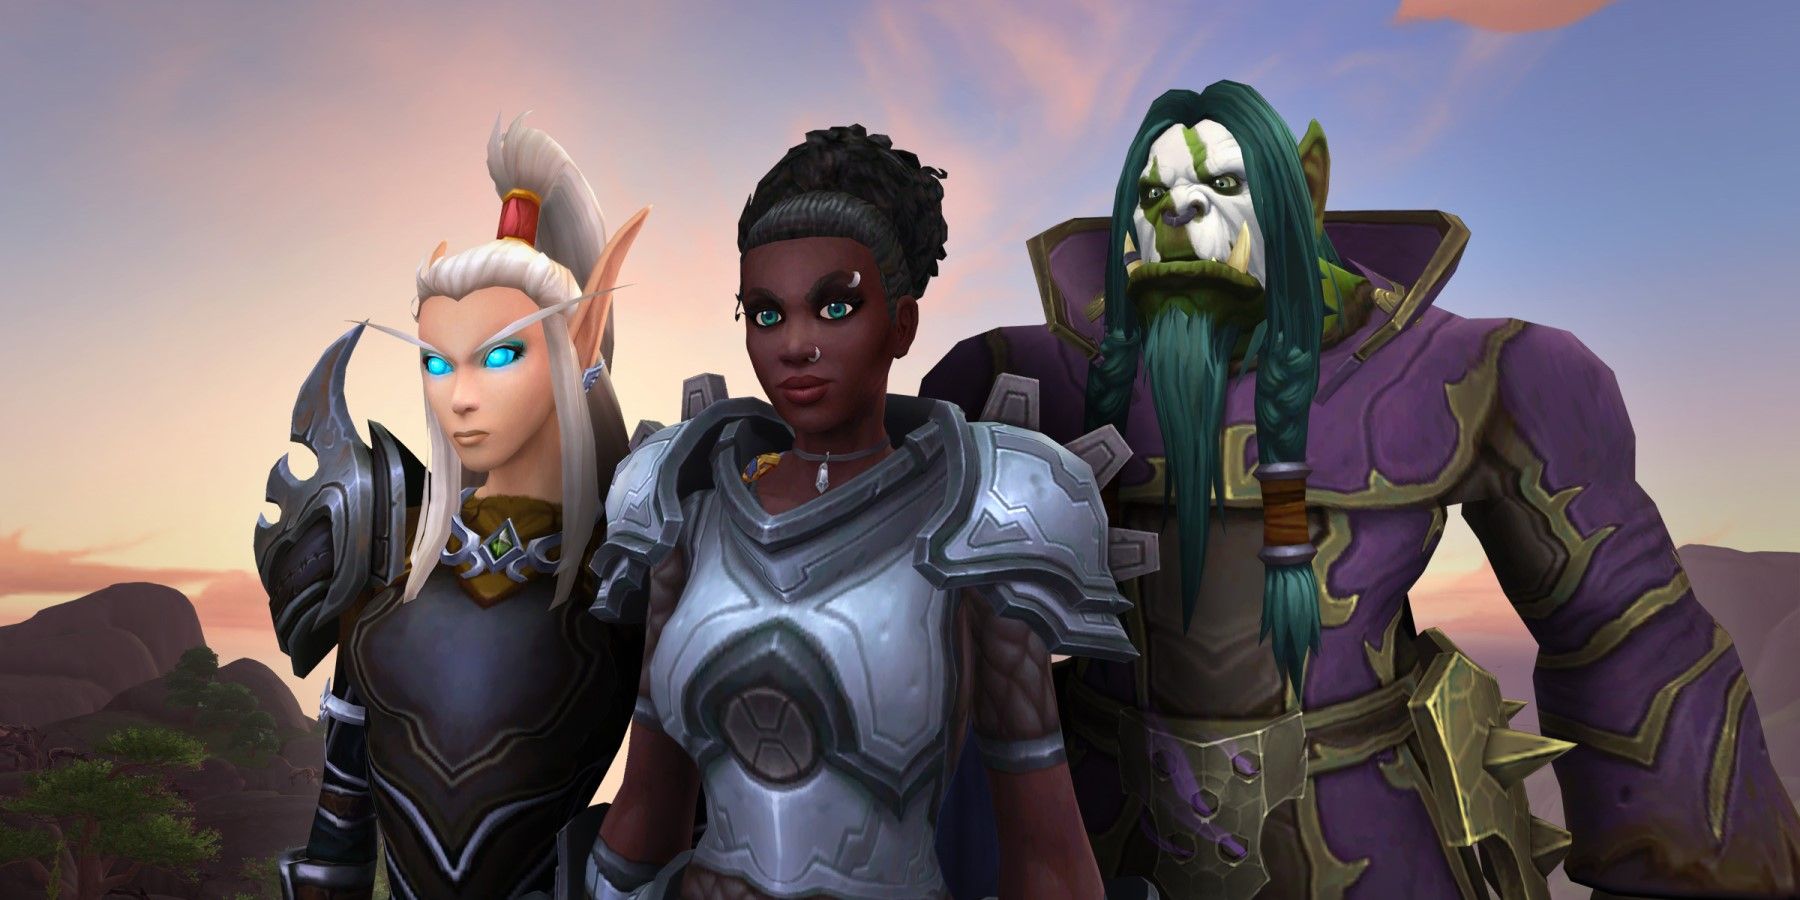 Exciting New Customization and Class Options in World of Warcraft